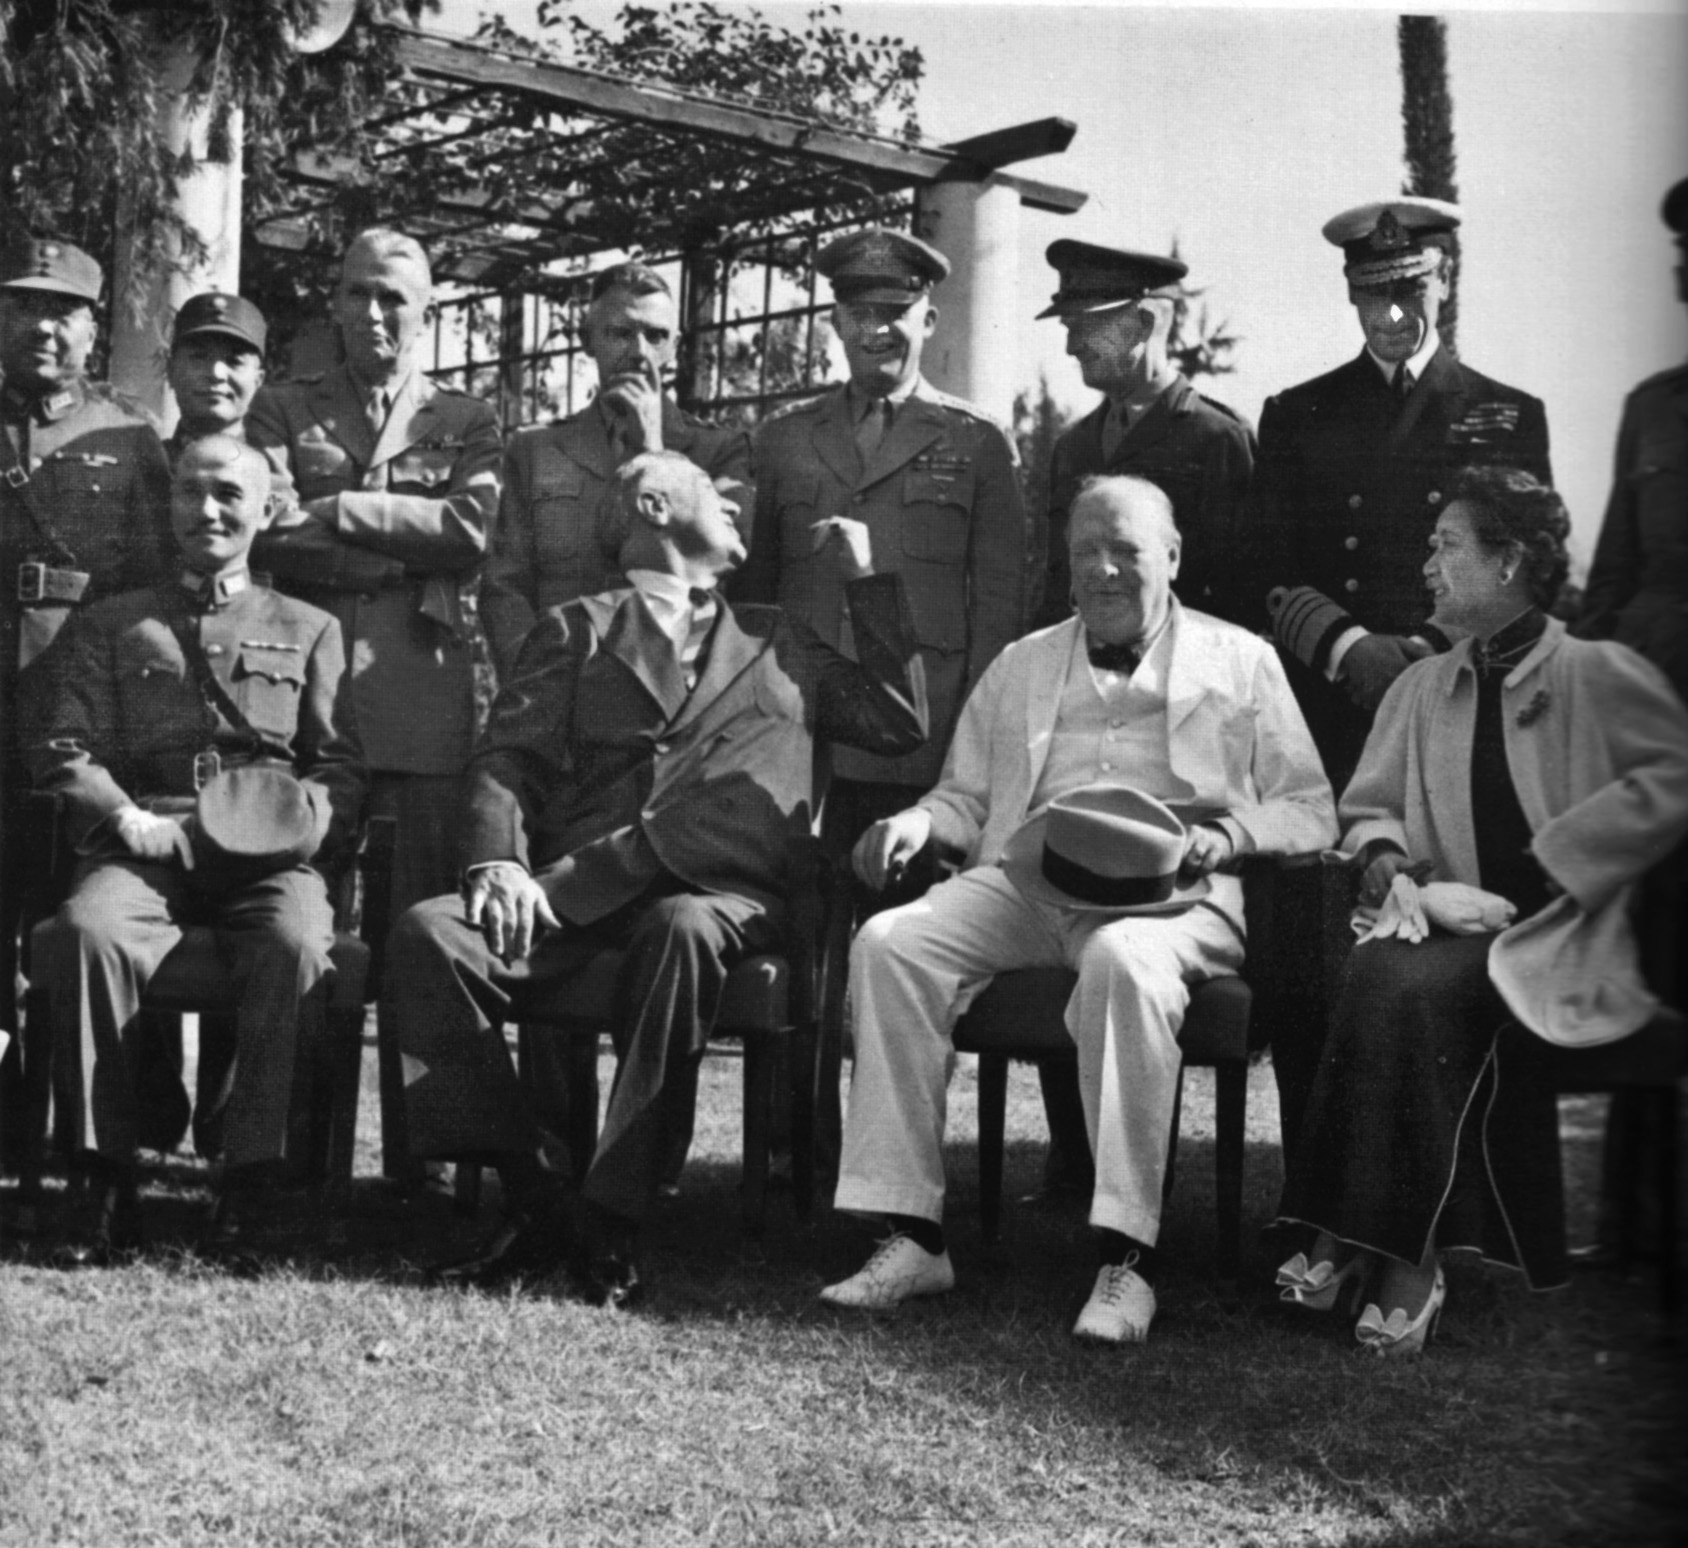 Chinese leader Generalissimo Chiang Kai-shek, seated left, joins President Roosevelt, Prime Minister Churchill and Madame Chiang during their conference in Cairo, immediately before the meeting of the Big Three at Tehran. Military officers behind the national leaders include U.S. General Brehon Somervell, U.S. General Joseph Stillwell, U.S. General Dwight D. Eisenhower, British Field Marshal Sir John Dill, and British Lord Louis Mountbatten.